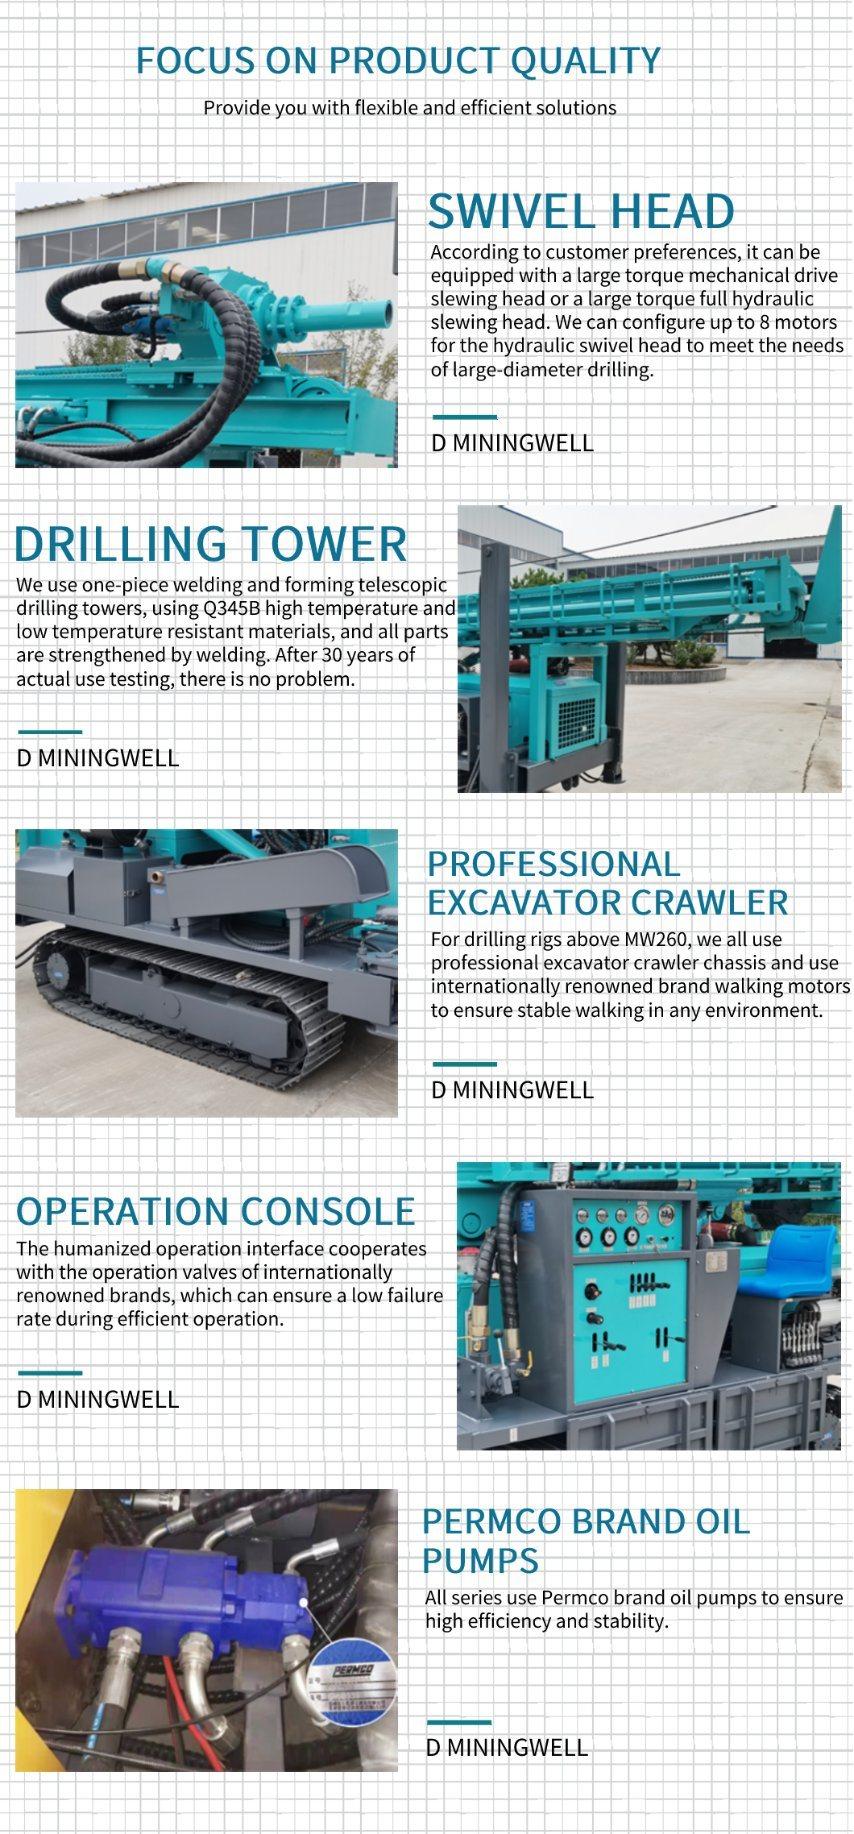 Dminingwell MW280 Water Well Drilling Rig Geotechnical Exploration 300m Deep Borehole Water Well Drilling Rig Machine